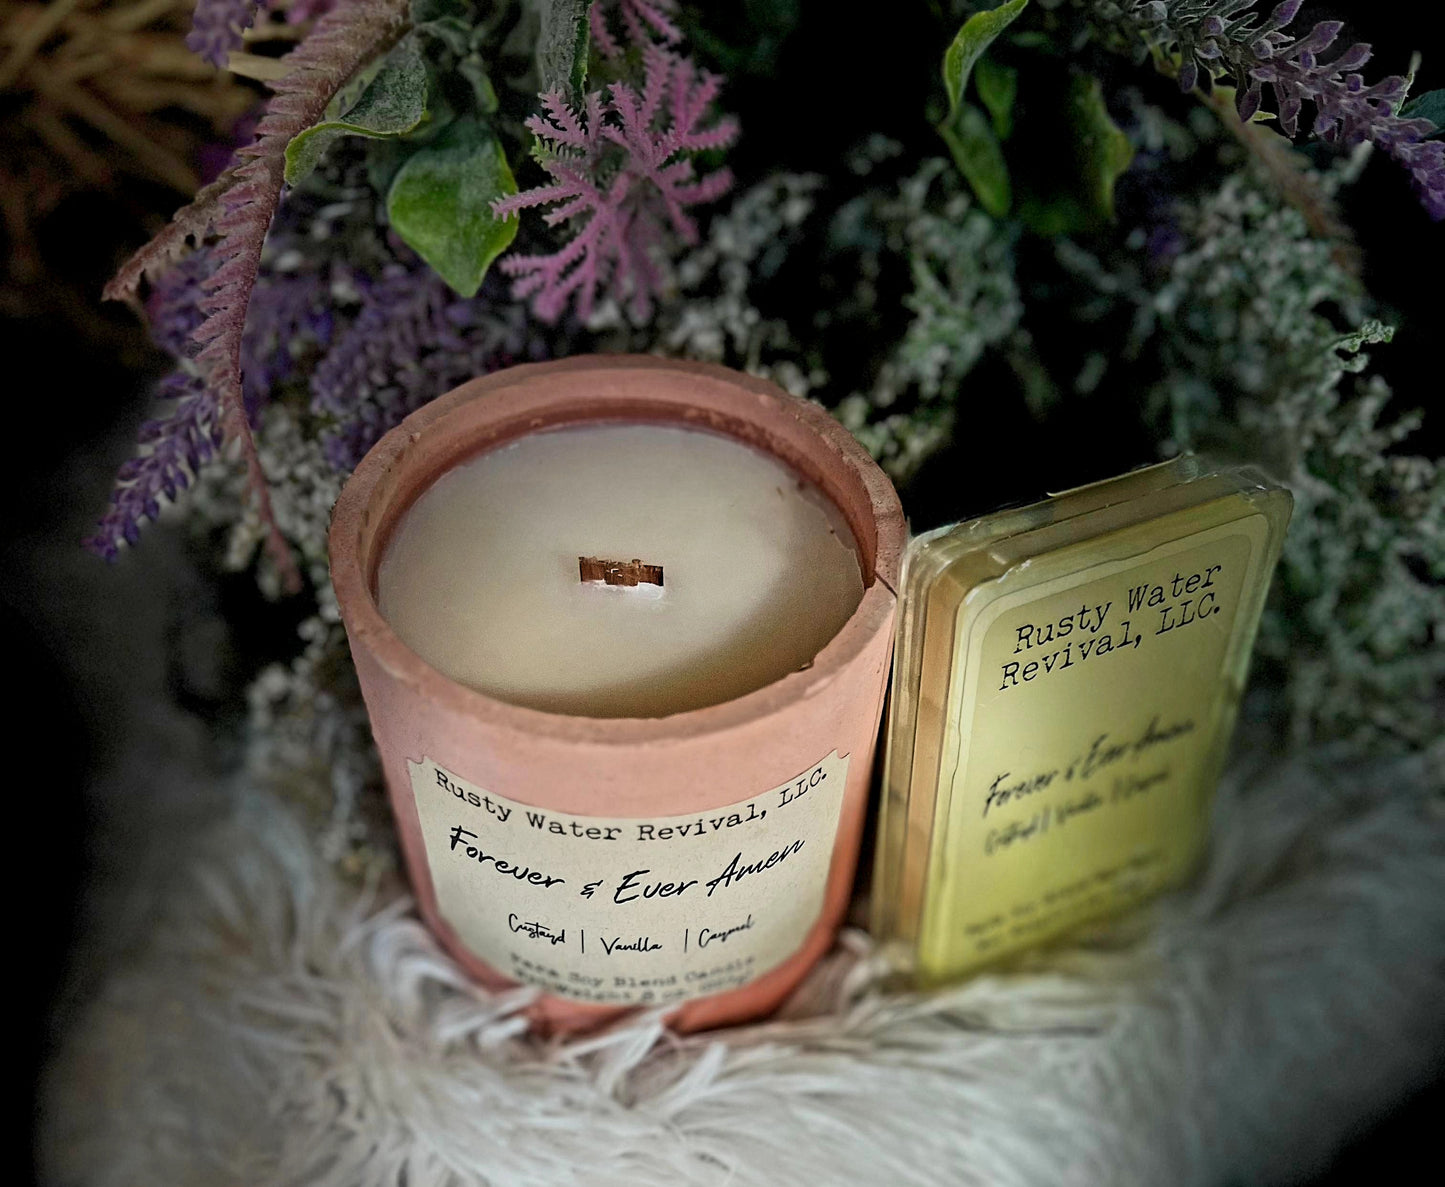 Forever & Ever Amen Wooden Wick Jar Candle & Wax Melts